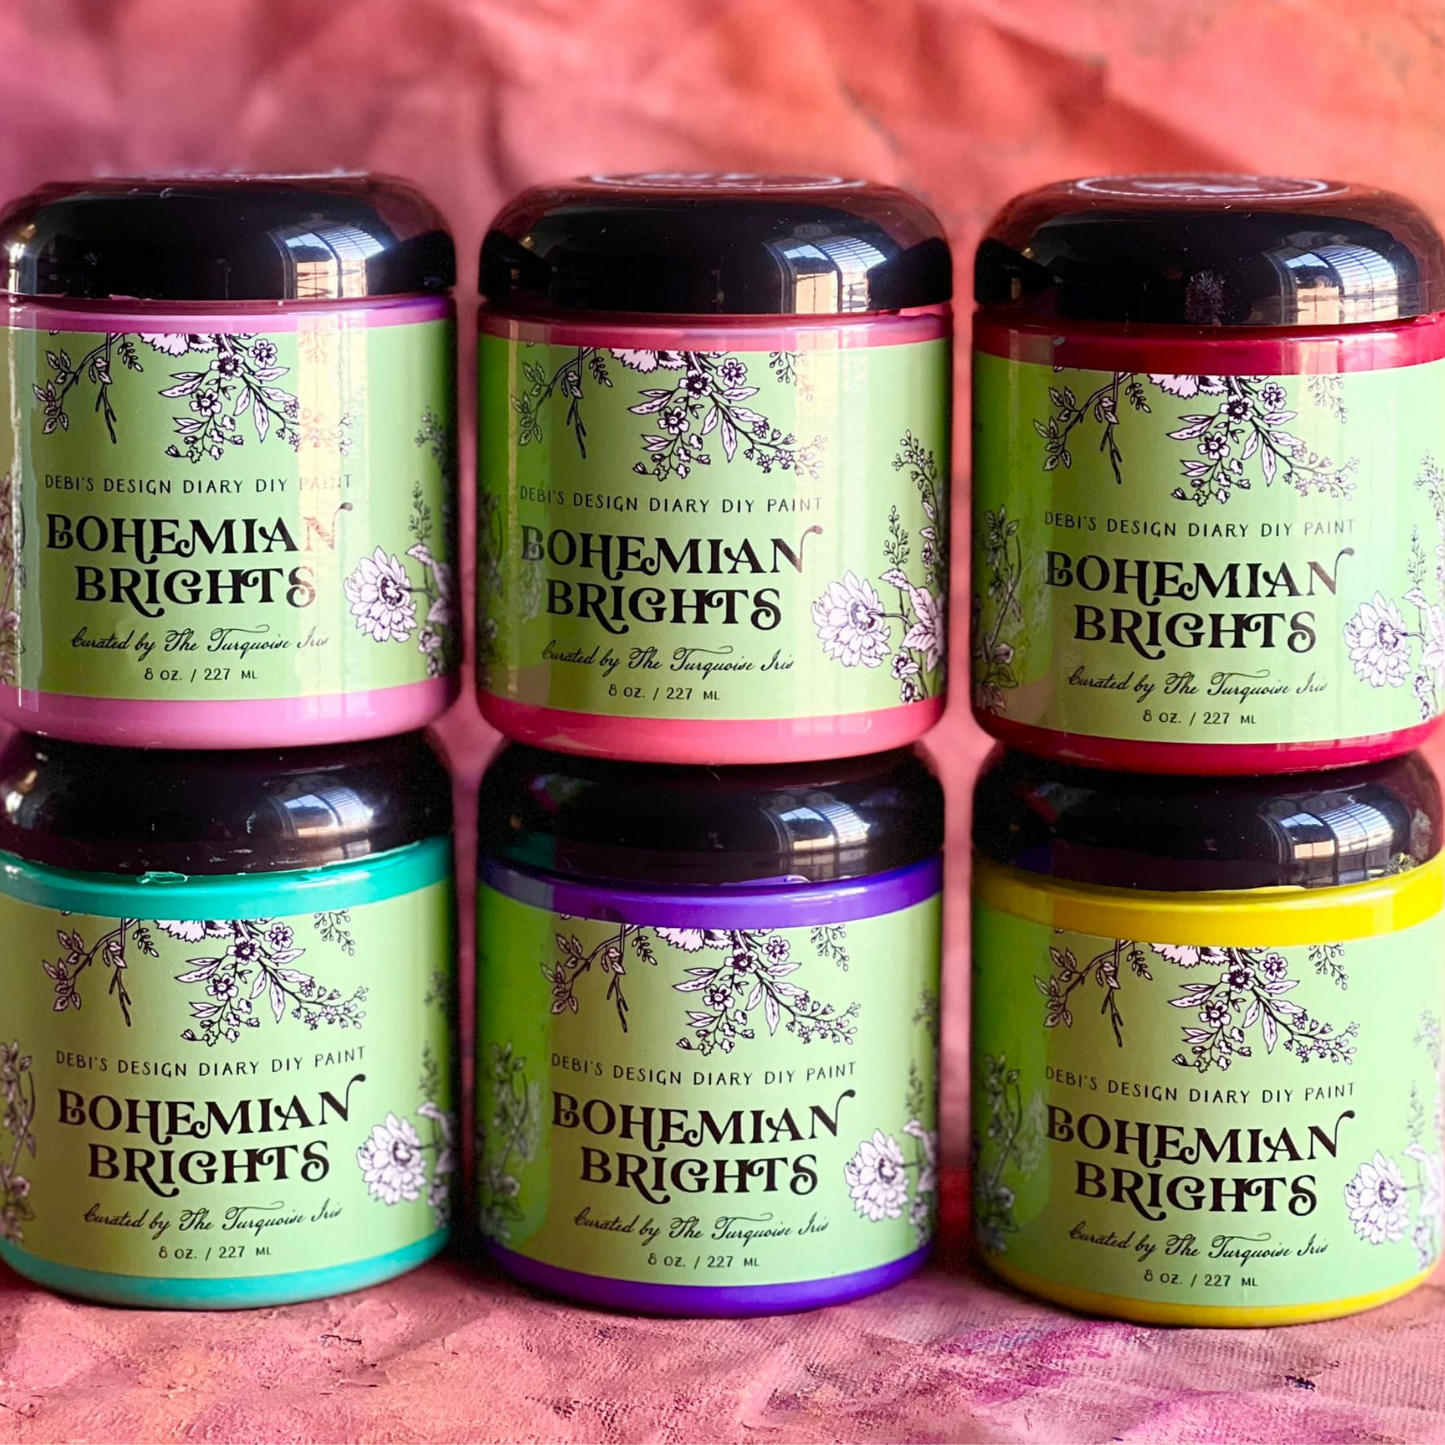 Bohemian Brights by Debi's Design Diary DIY Paint. 4 oz. jars available at Milton's Daughter. Curated by Dionne Woods of the Turquoise Iris.